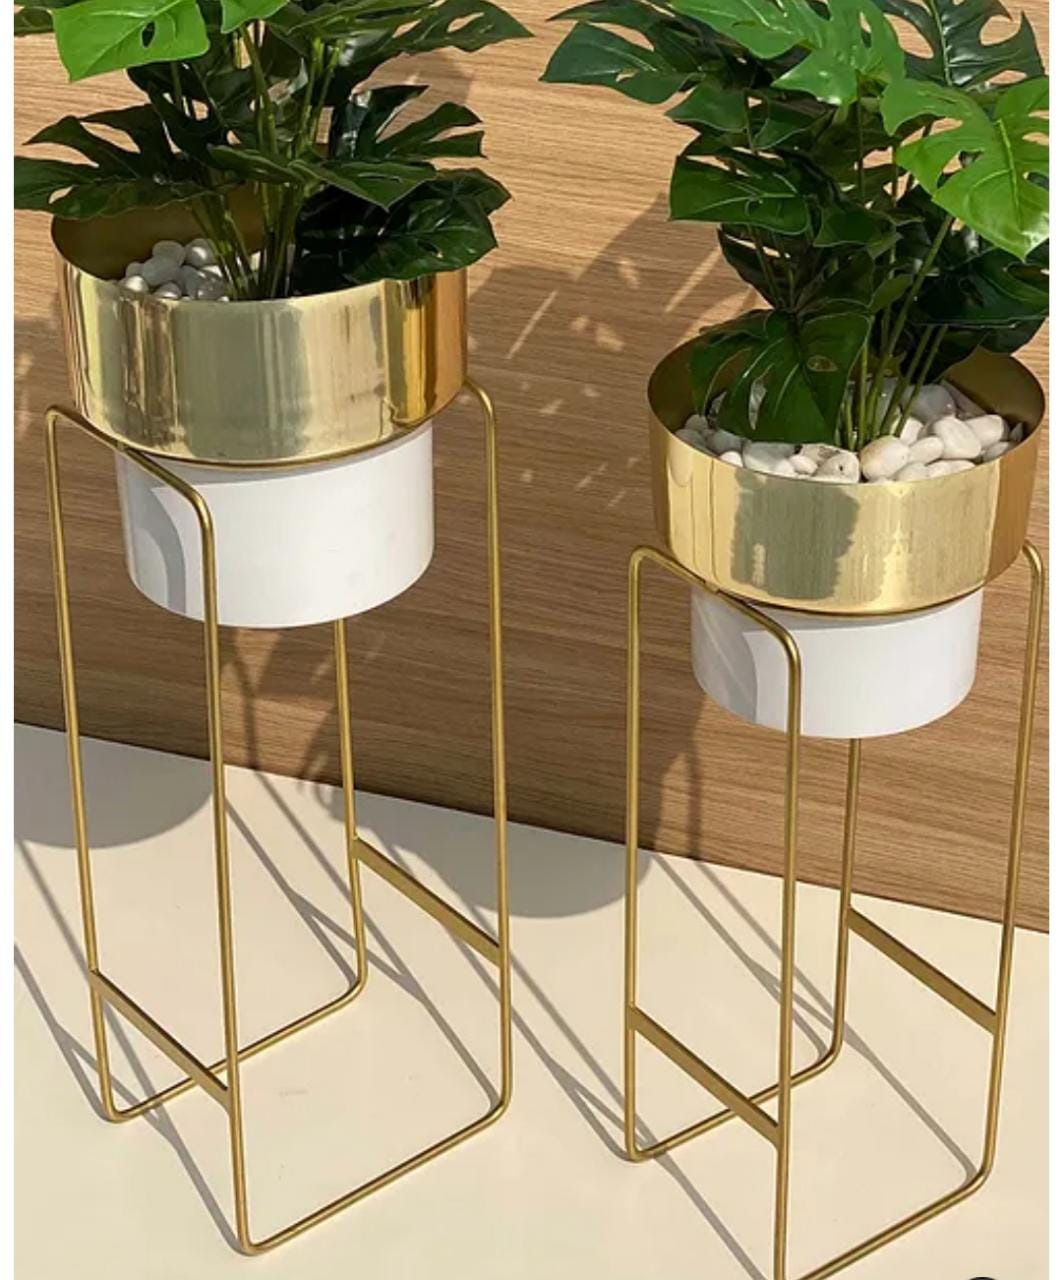 Indoor Living Room Small (Set of 2) Electroplated Planters